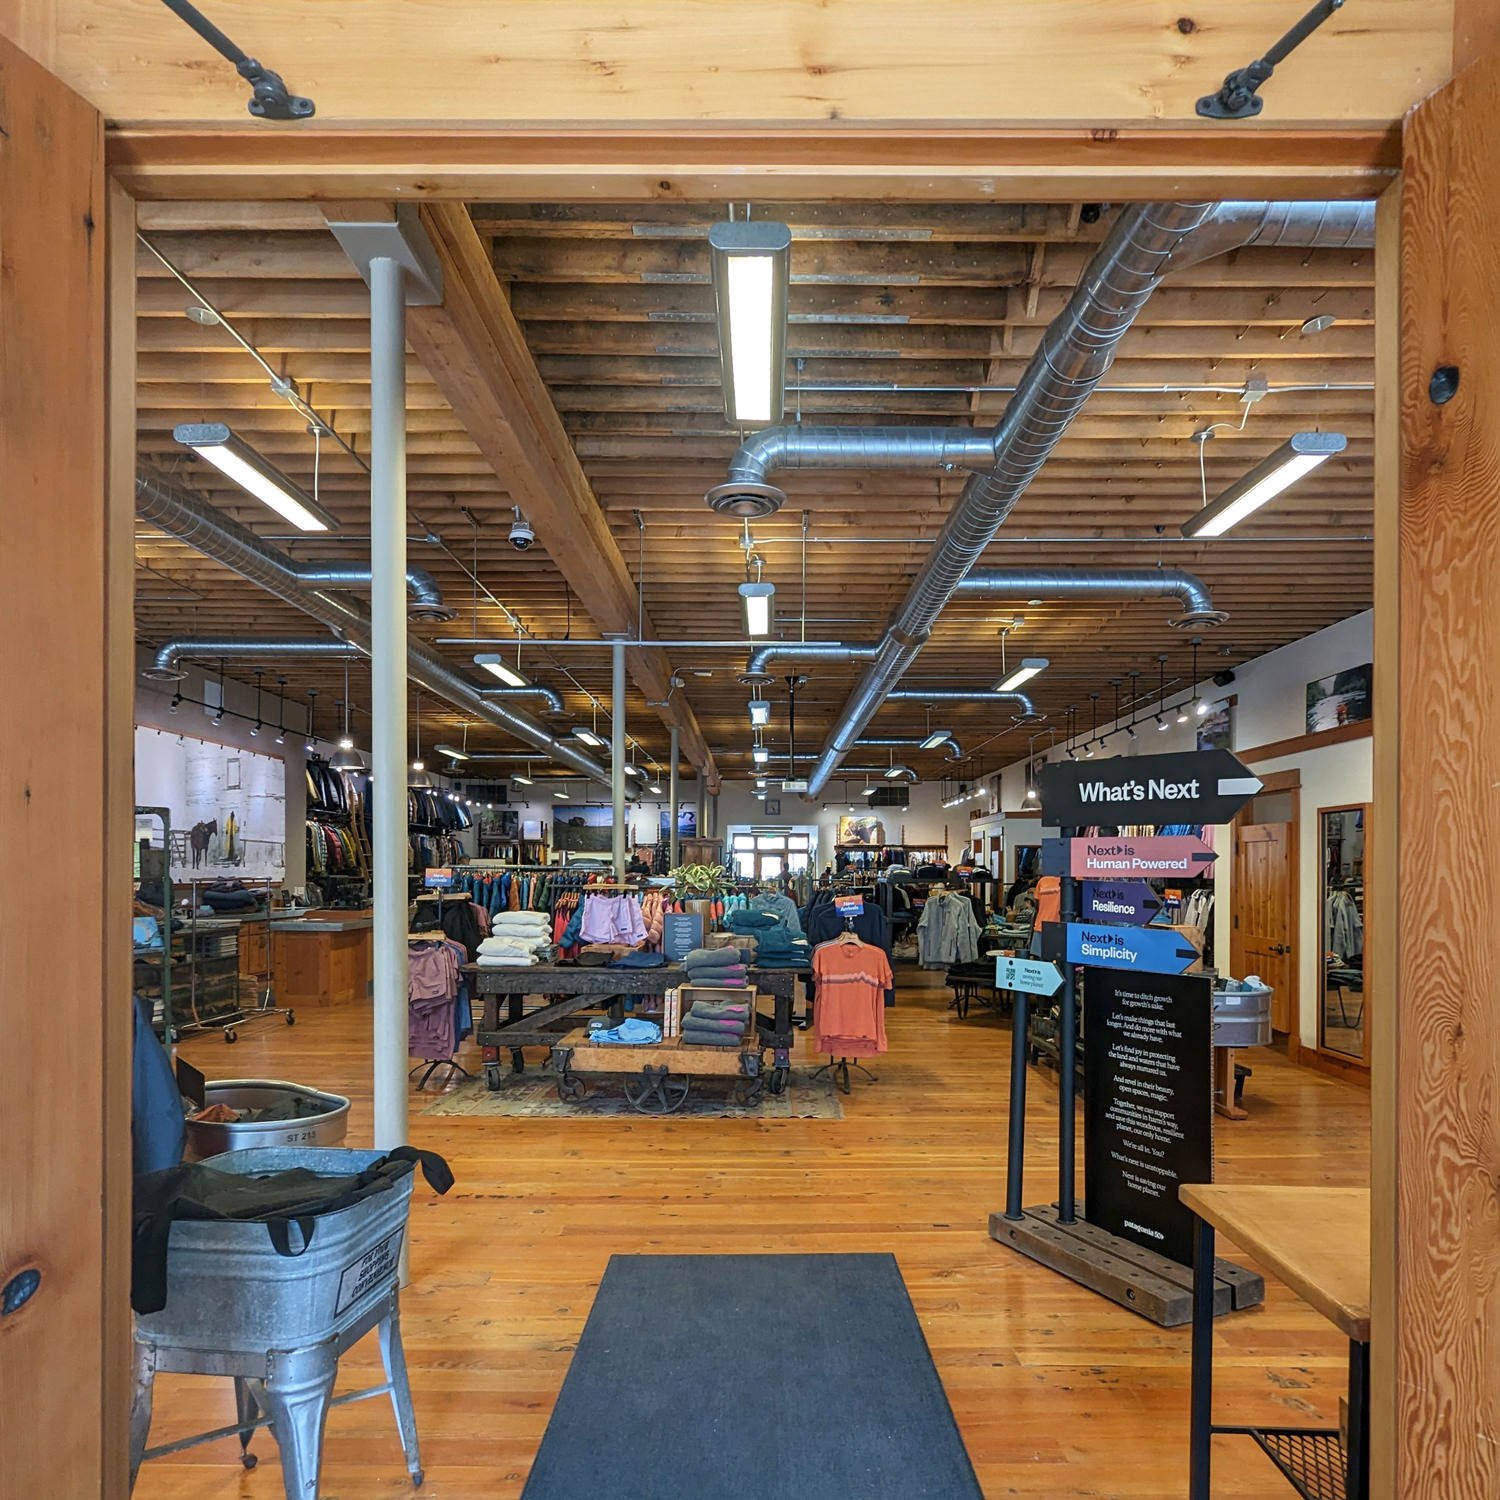 The Patagonia Outlet Store in | Peacefully adventure through life. and live. Intentionally. Sustainably. | former crisis counselor and health professional (with celiac disease) sharing slow travel, gluten-free